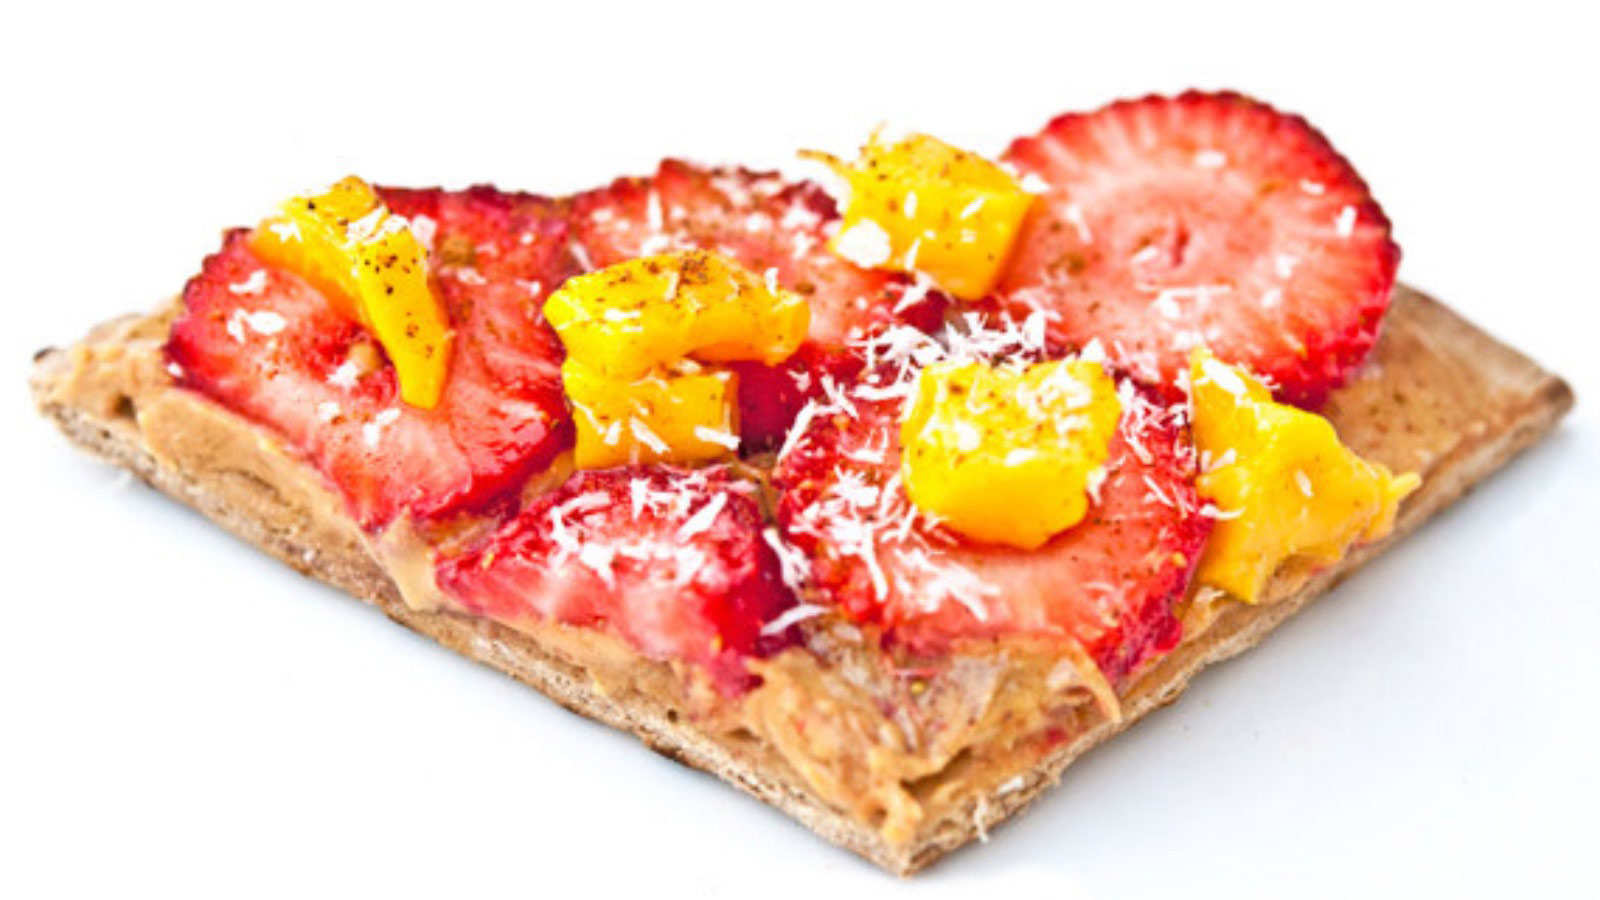 A single slice of fruit pizza on a white background.